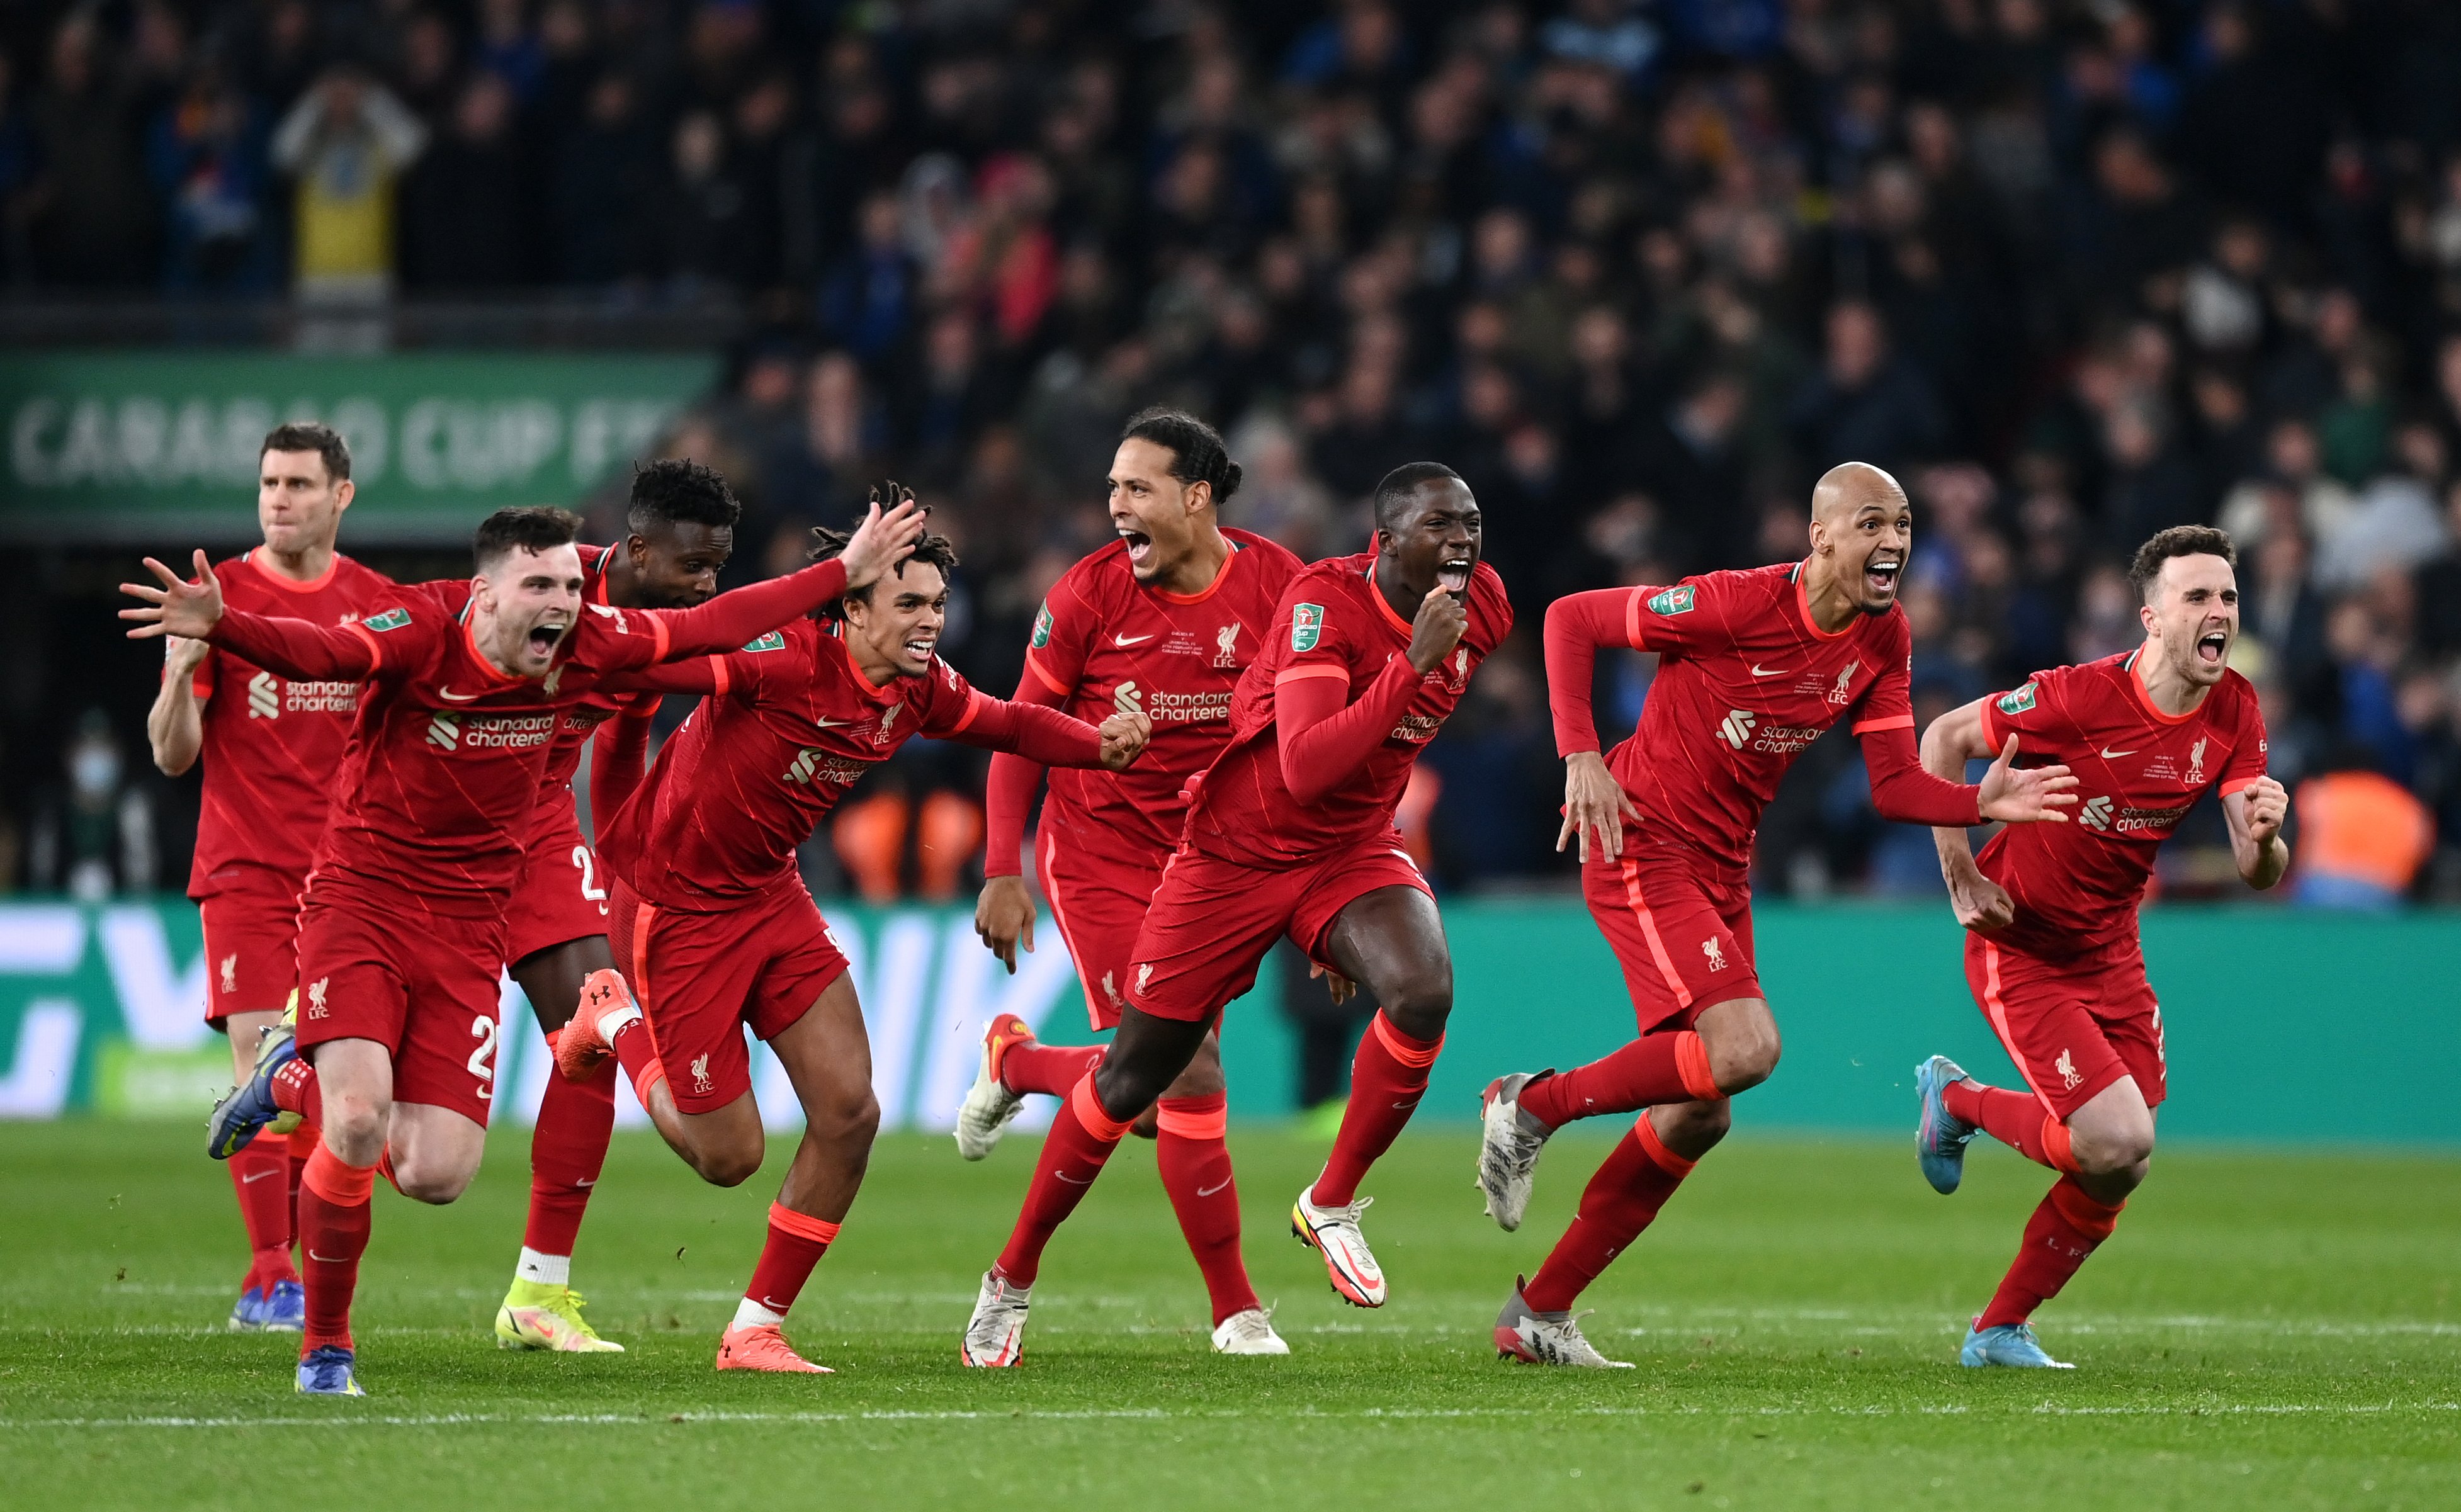 Carabao Cup Final Highlights: Liverpool beat Chelsea on penalties to lift the Carabao Cup trophy for a record 9th time as Kepa misses crucial penalty kick